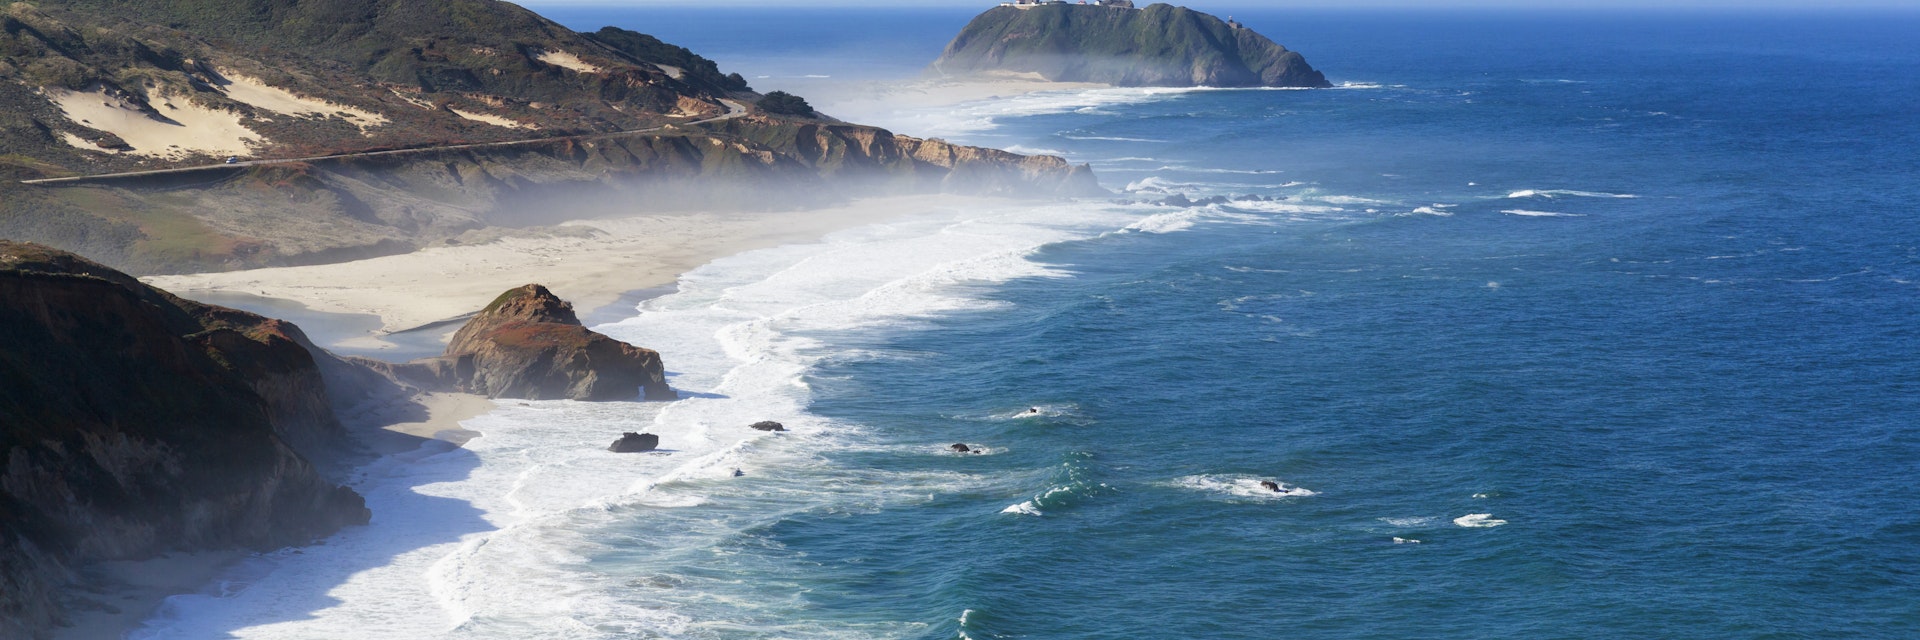 USA, California, Pacific Coast, National Scenic Byway, Big Sur, Point Sur State Historic Park, View to Point Sur Lighthouse